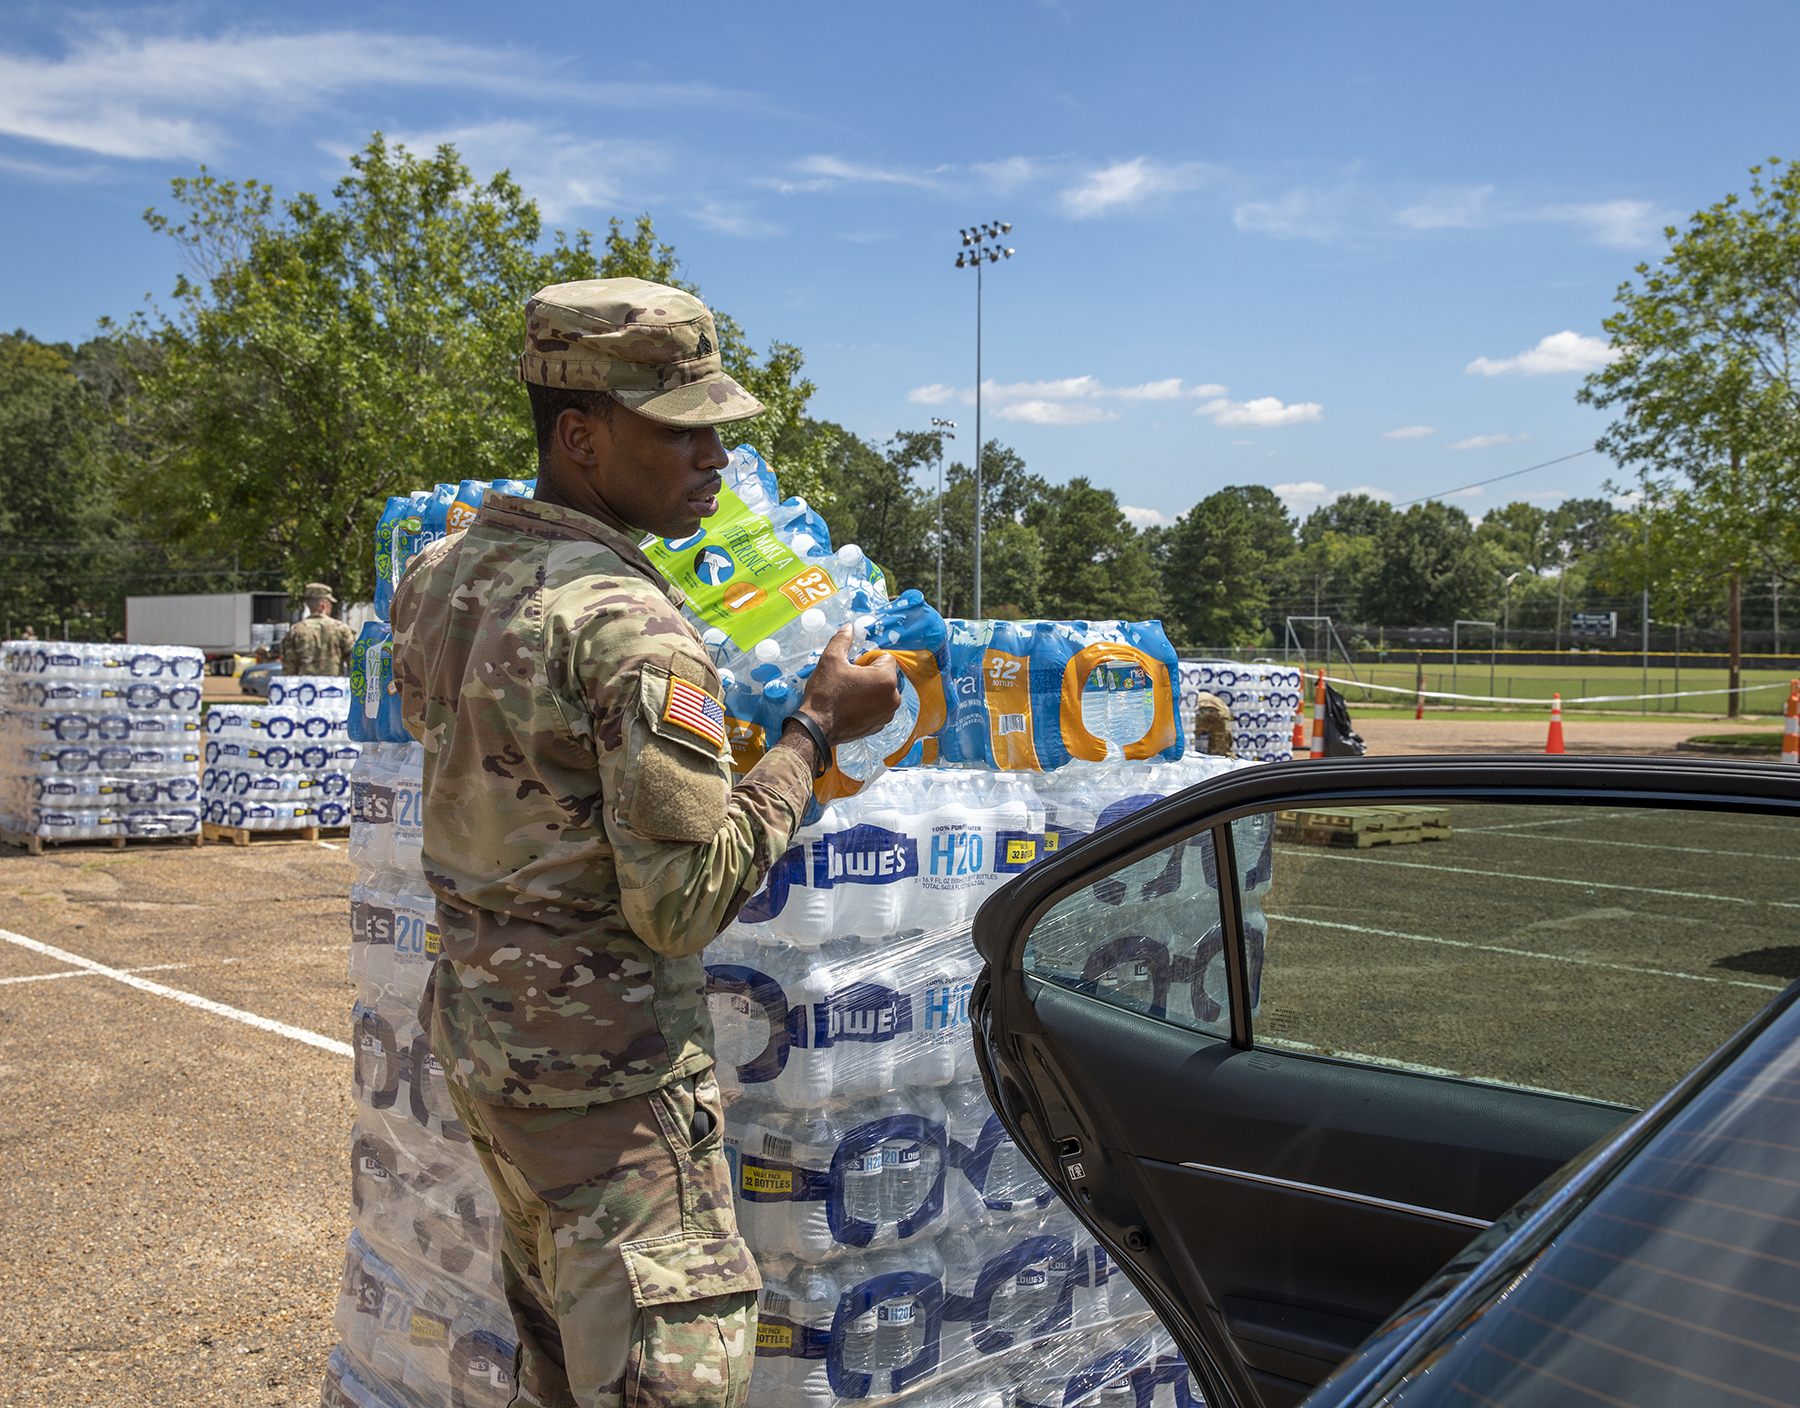 A soldier with 66th Troop Command, Mississippi Army National Guard, puts water in the backseat of a person's car at the Smith-Wills Stadium in Jackson, Mississippi, Sept. 1, 2022. Nearly 600 Mississippi National Guardsmen were set up across seven sites throughout Jackson for residents to collect bottled water and non-potable water from water trucks to help relieve some effects of the Jackson water crisis. (U.S. Army National Guard photo by Staff Sgt. Connie Jones, https://www.flickr.com/photos/thenationalguard/52329354023/ s)